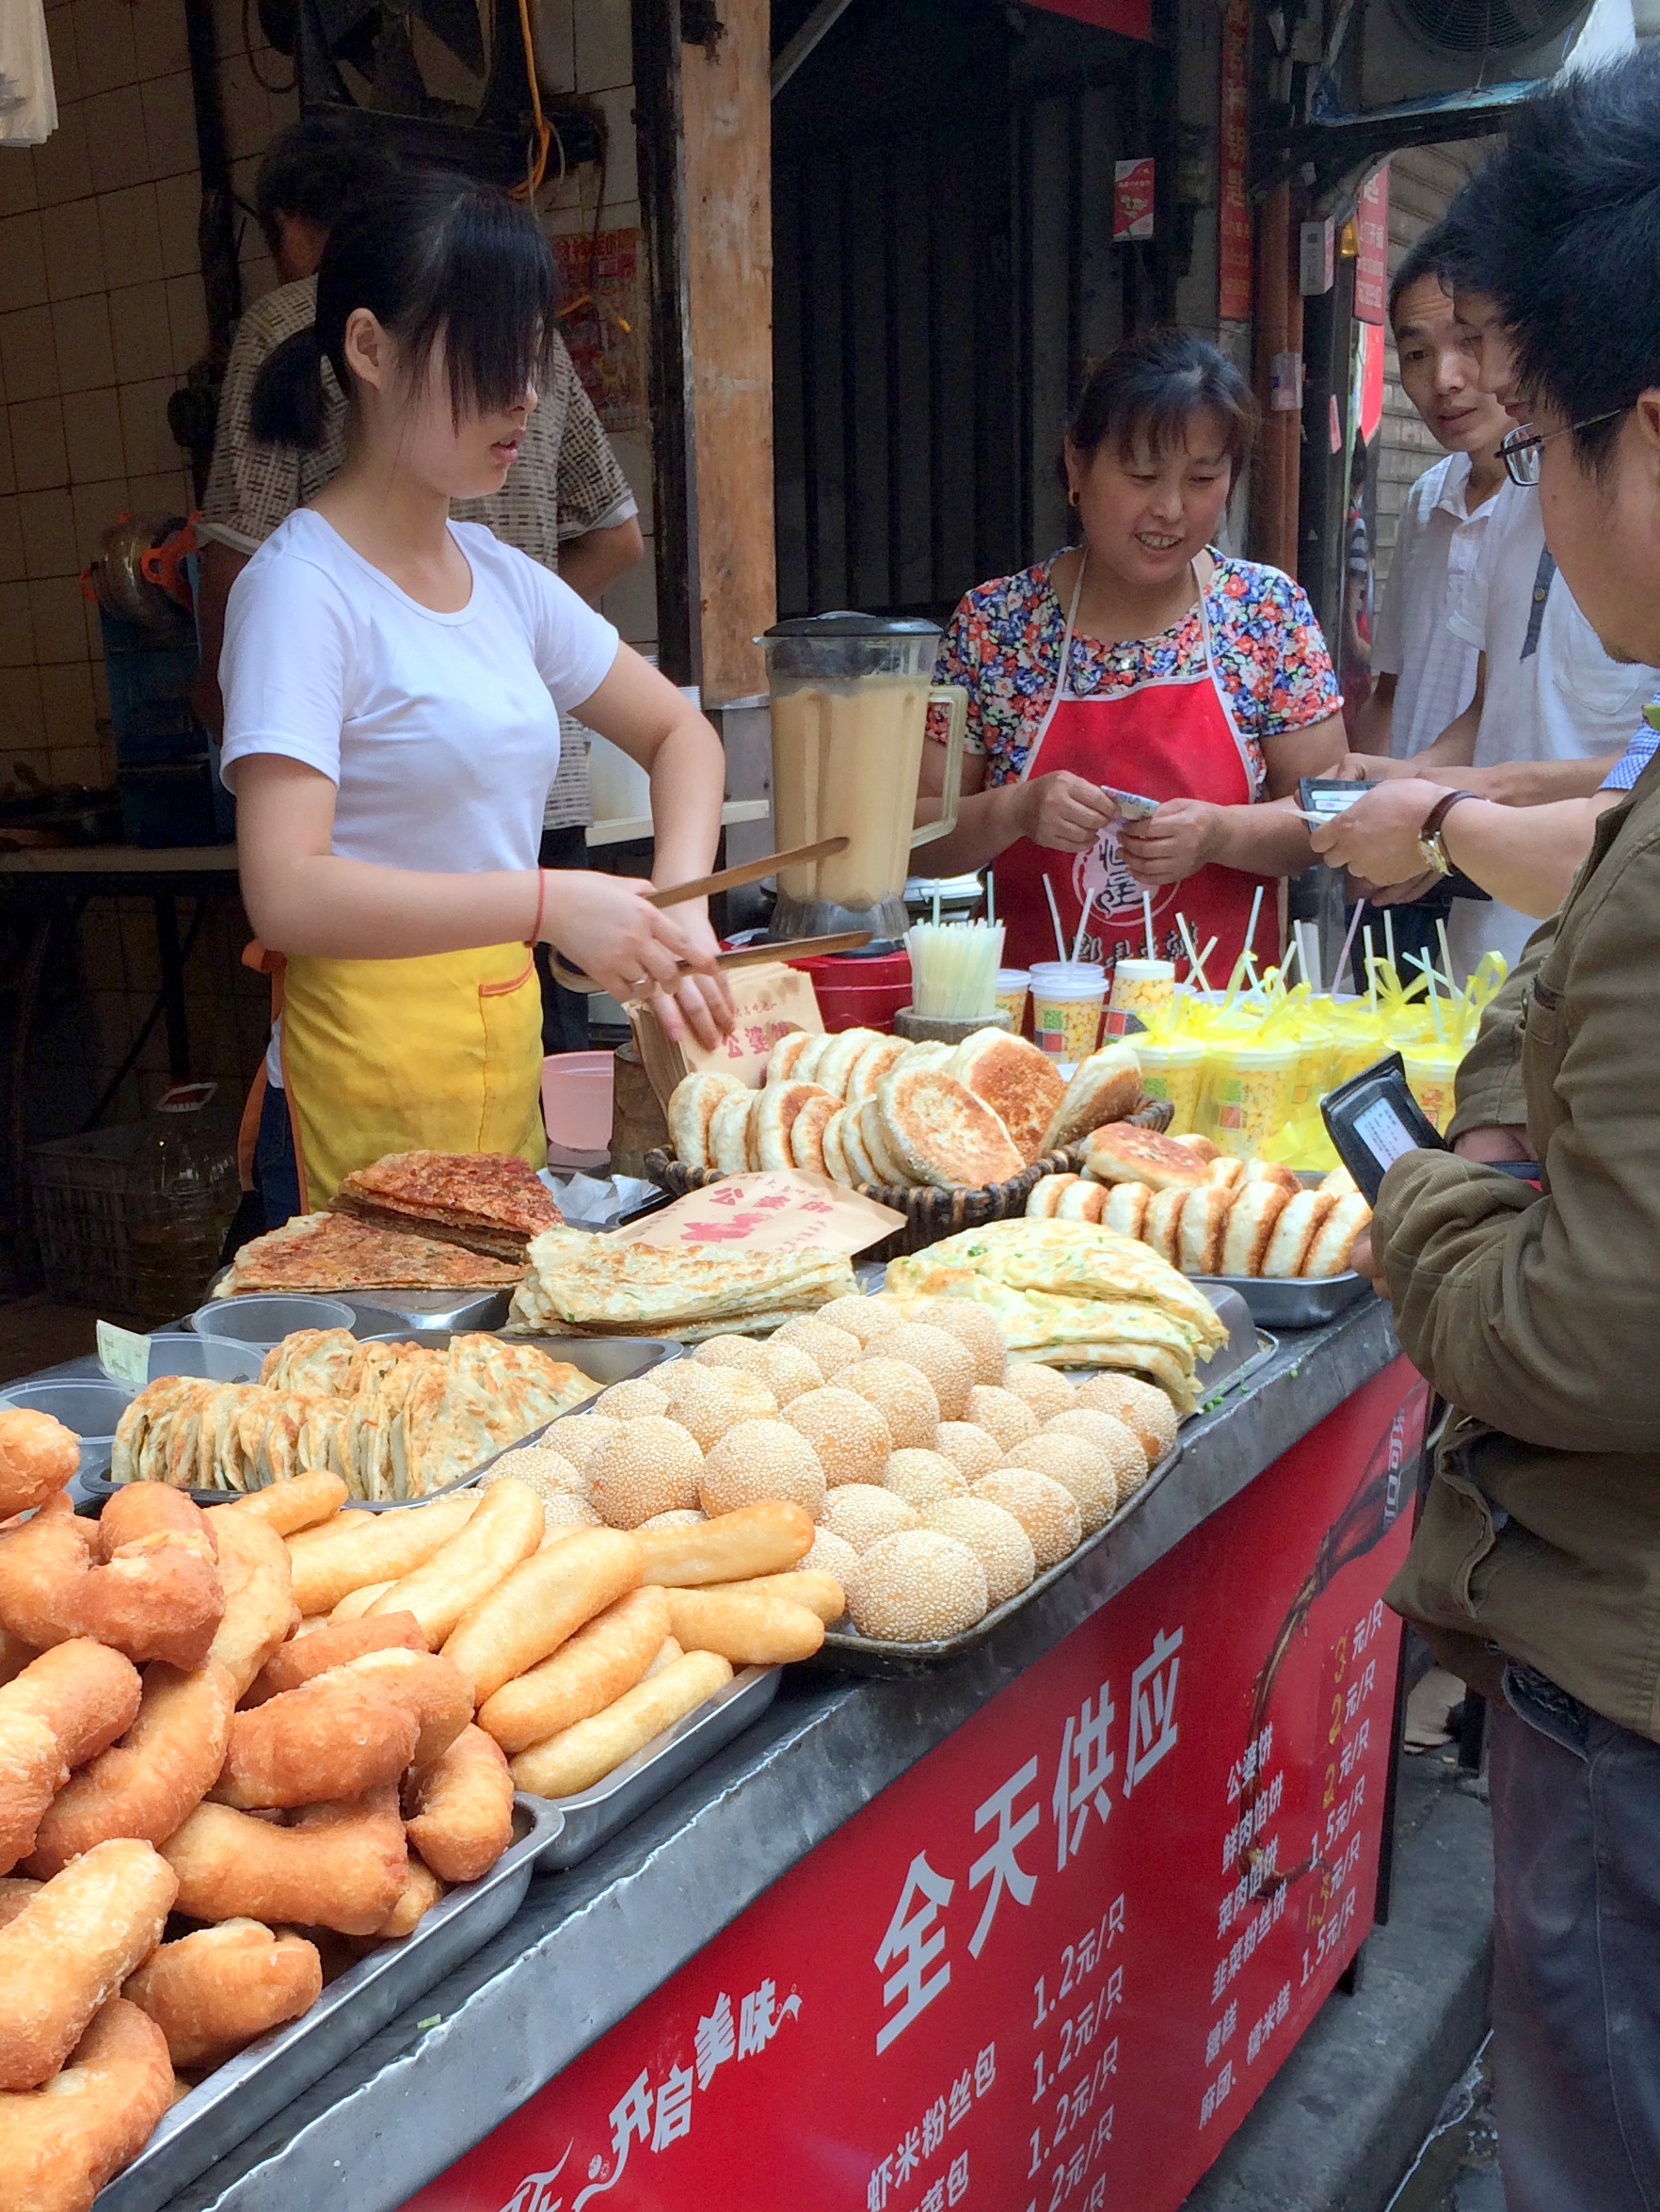 Postcard from Shanghai - Longtong and Streetfood ...